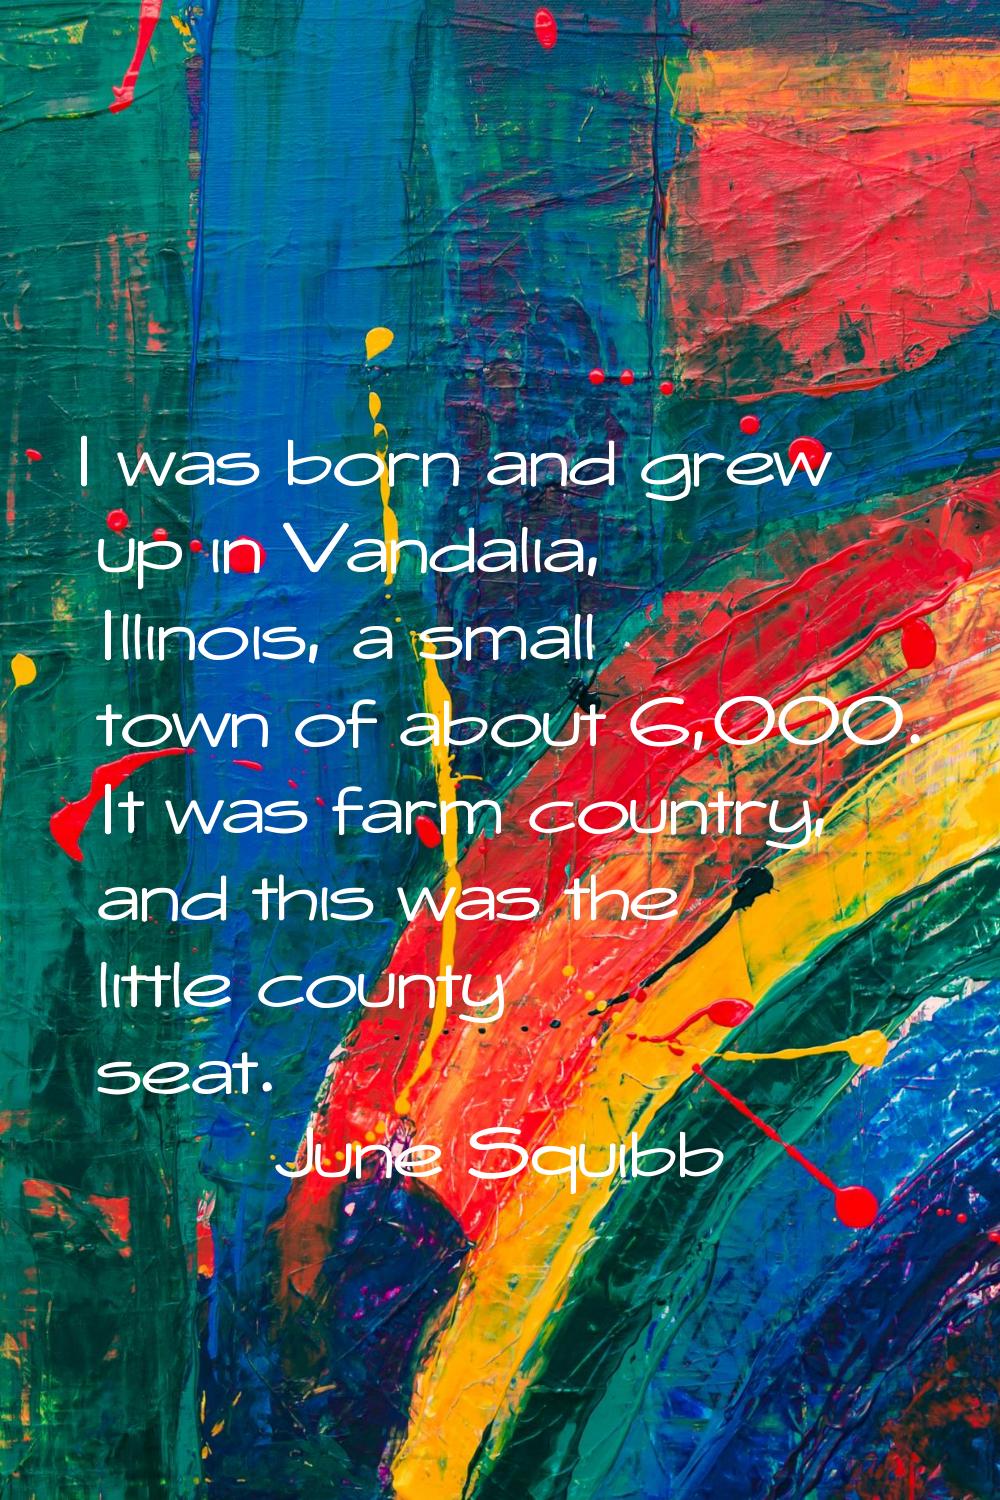 I was born and grew up in Vandalia, Illinois, a small town of about 6,000. It was farm country, and